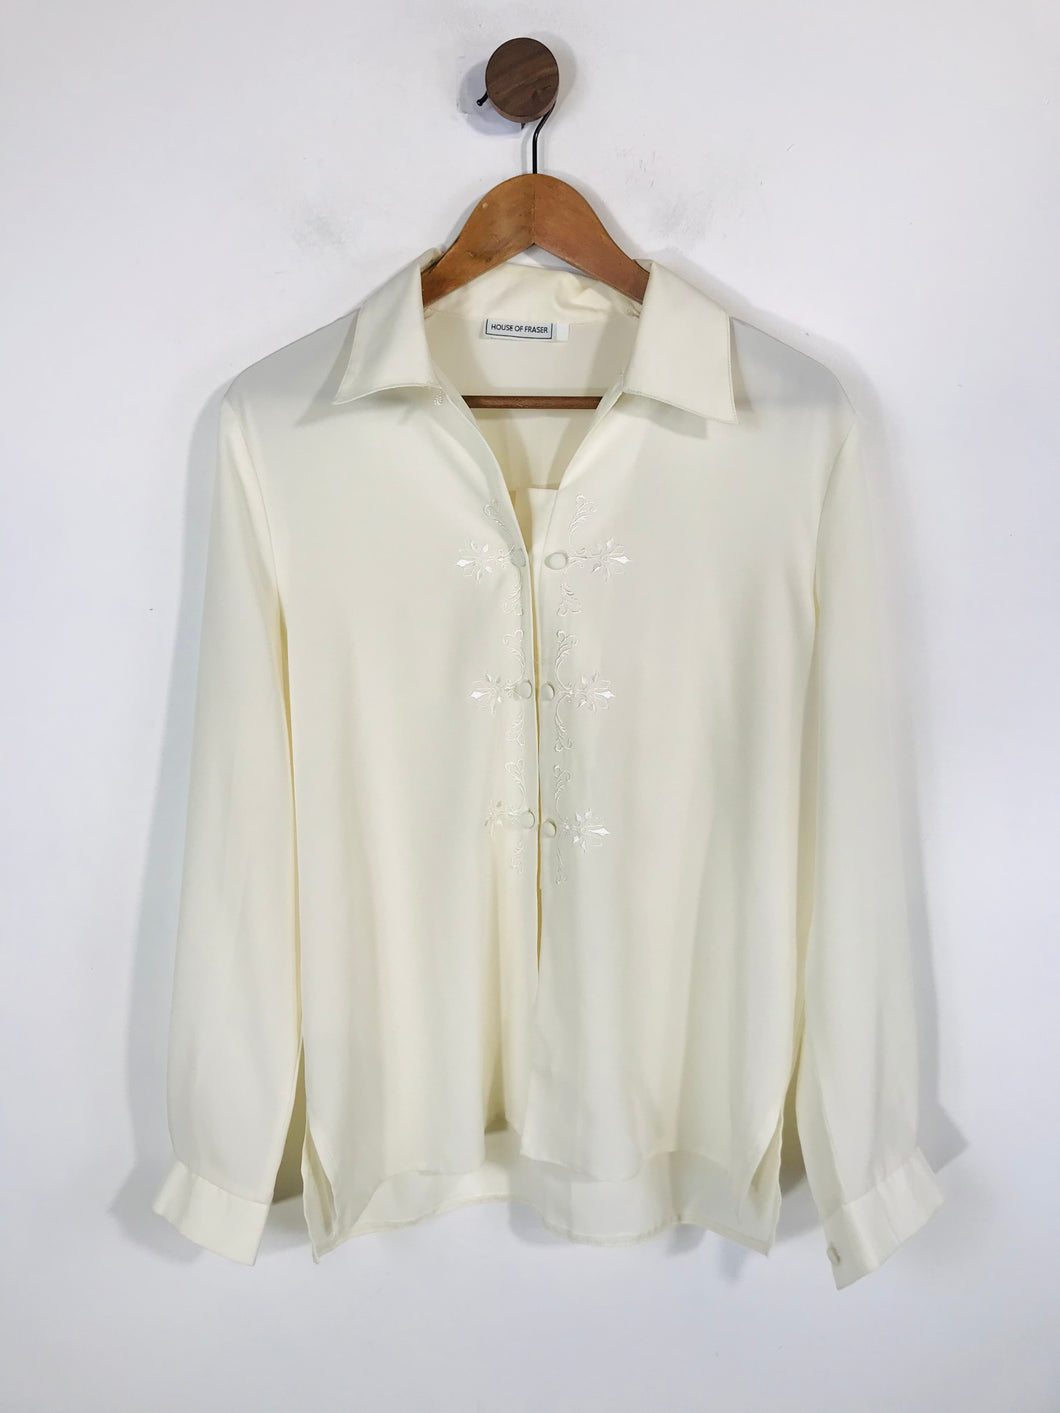 House of Fraser Women's Floral Embroidered Button-Up Shirt | L UK14 | White